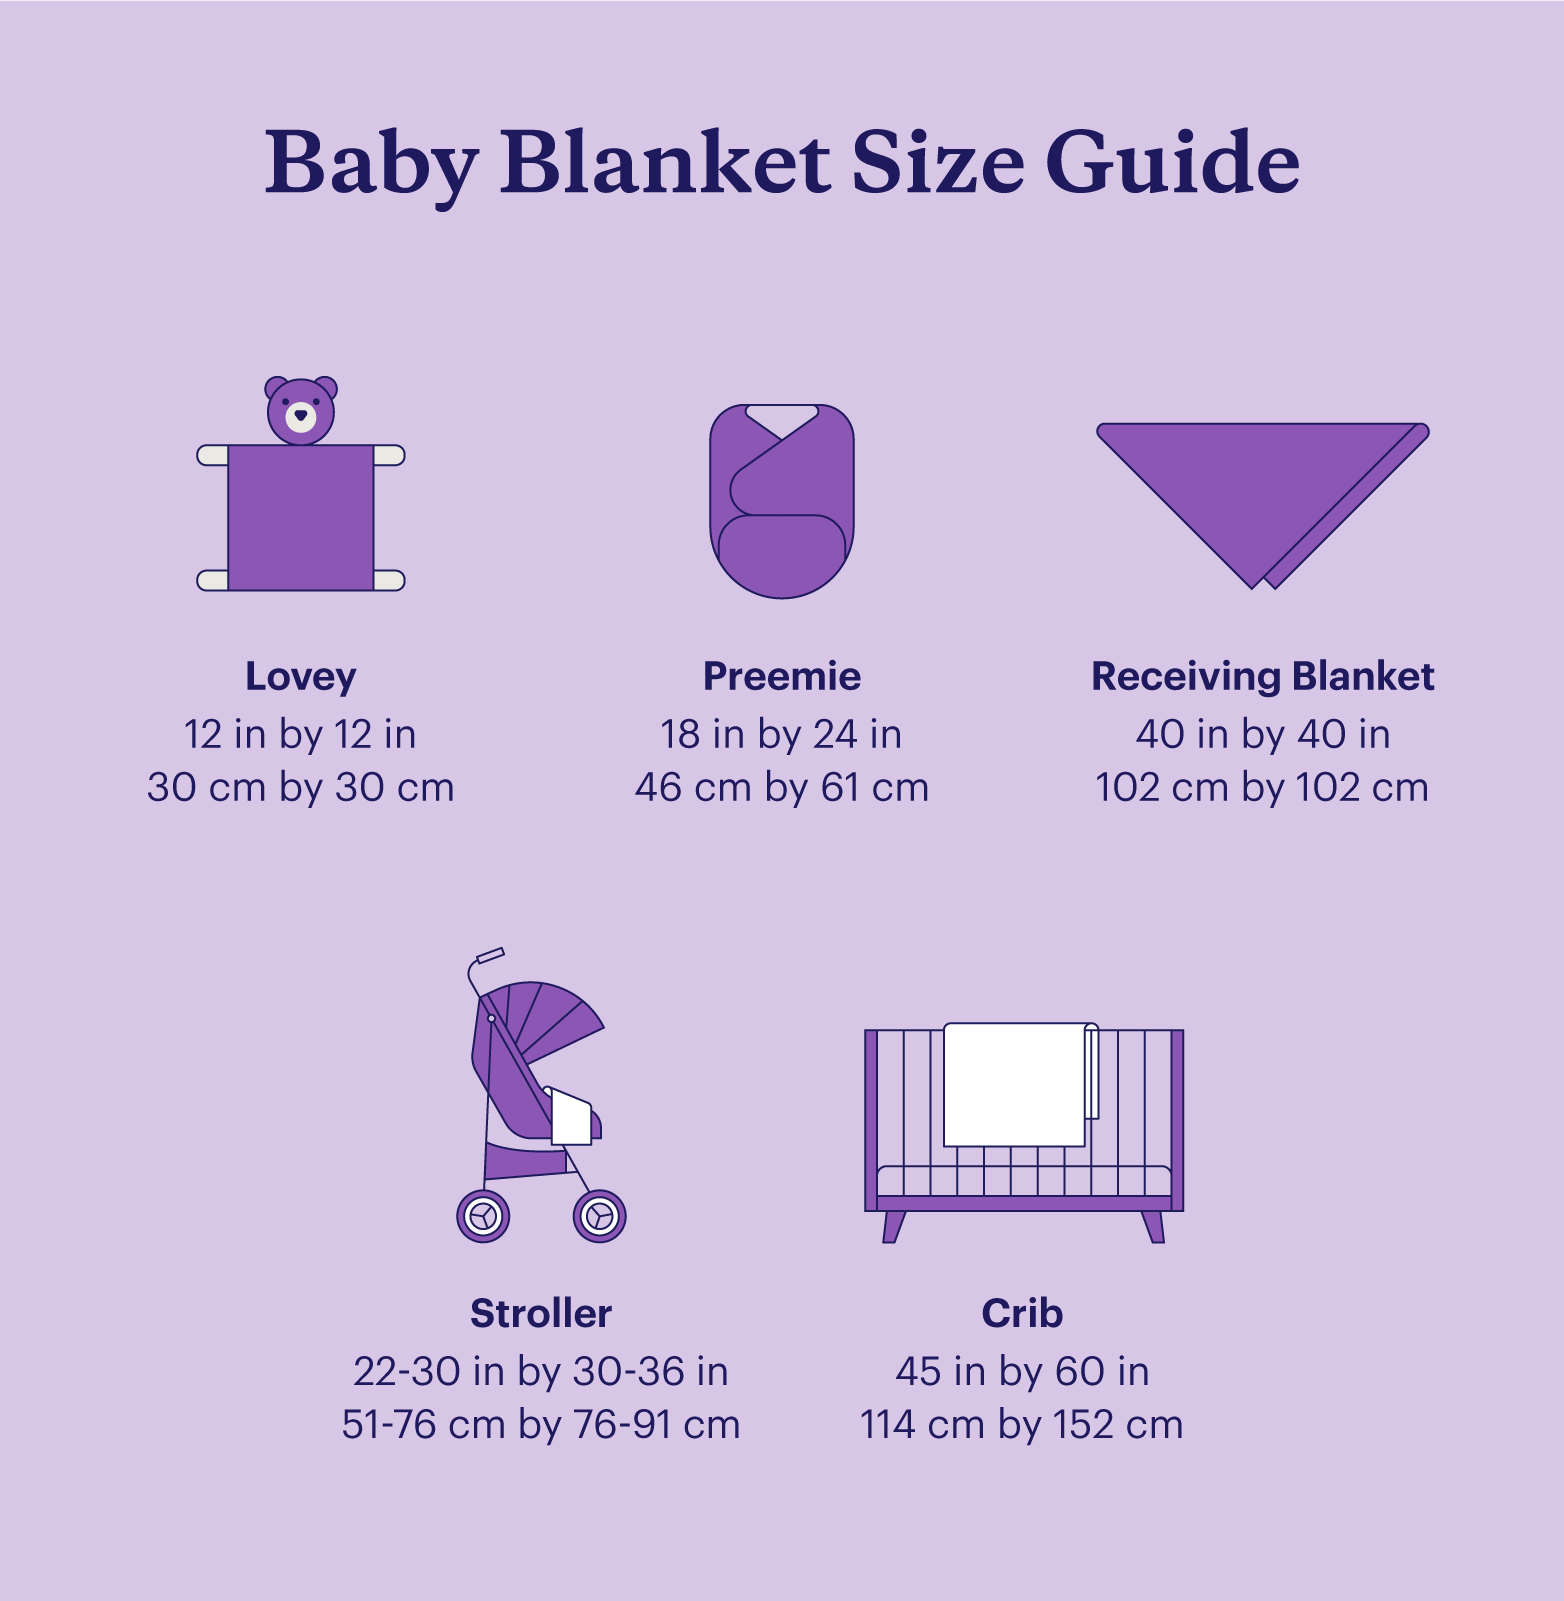 A baby blanket size guide showcases the dimensions of baby blanket sizes in inches and centimeters.